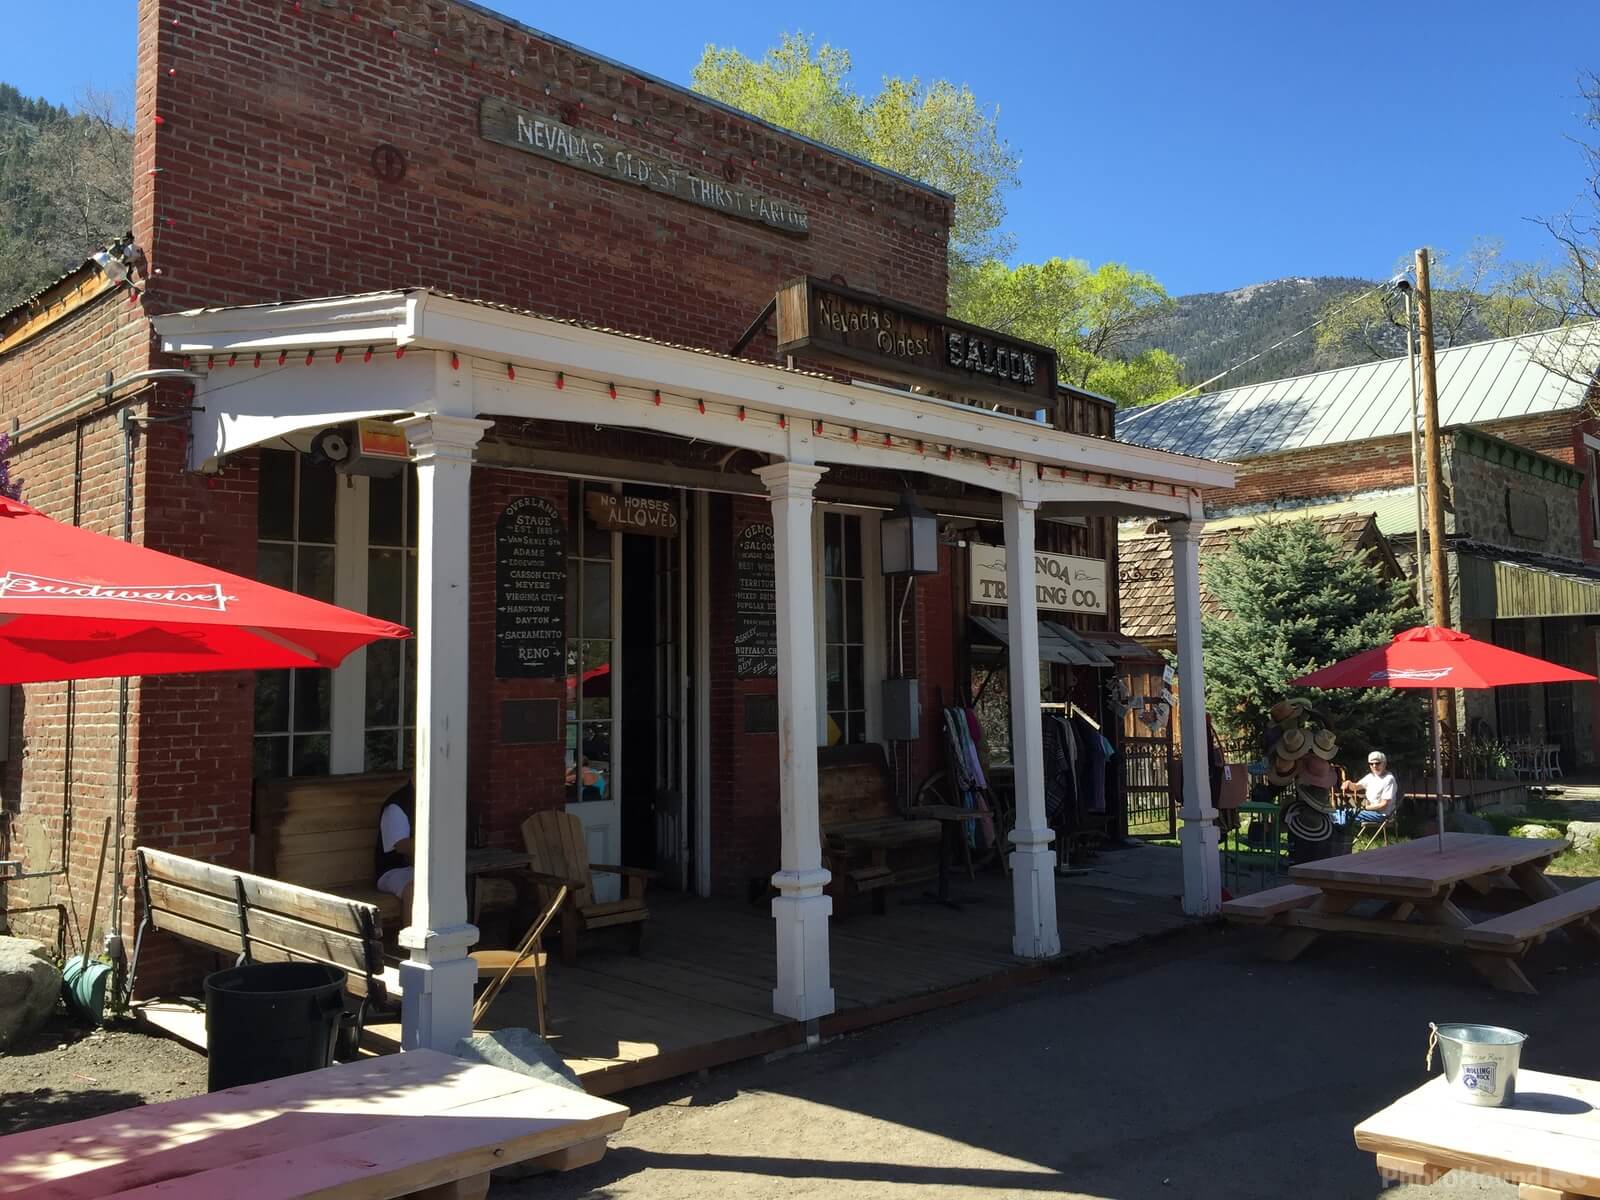 Image of Oldest Saloon in Nevada by Steve West